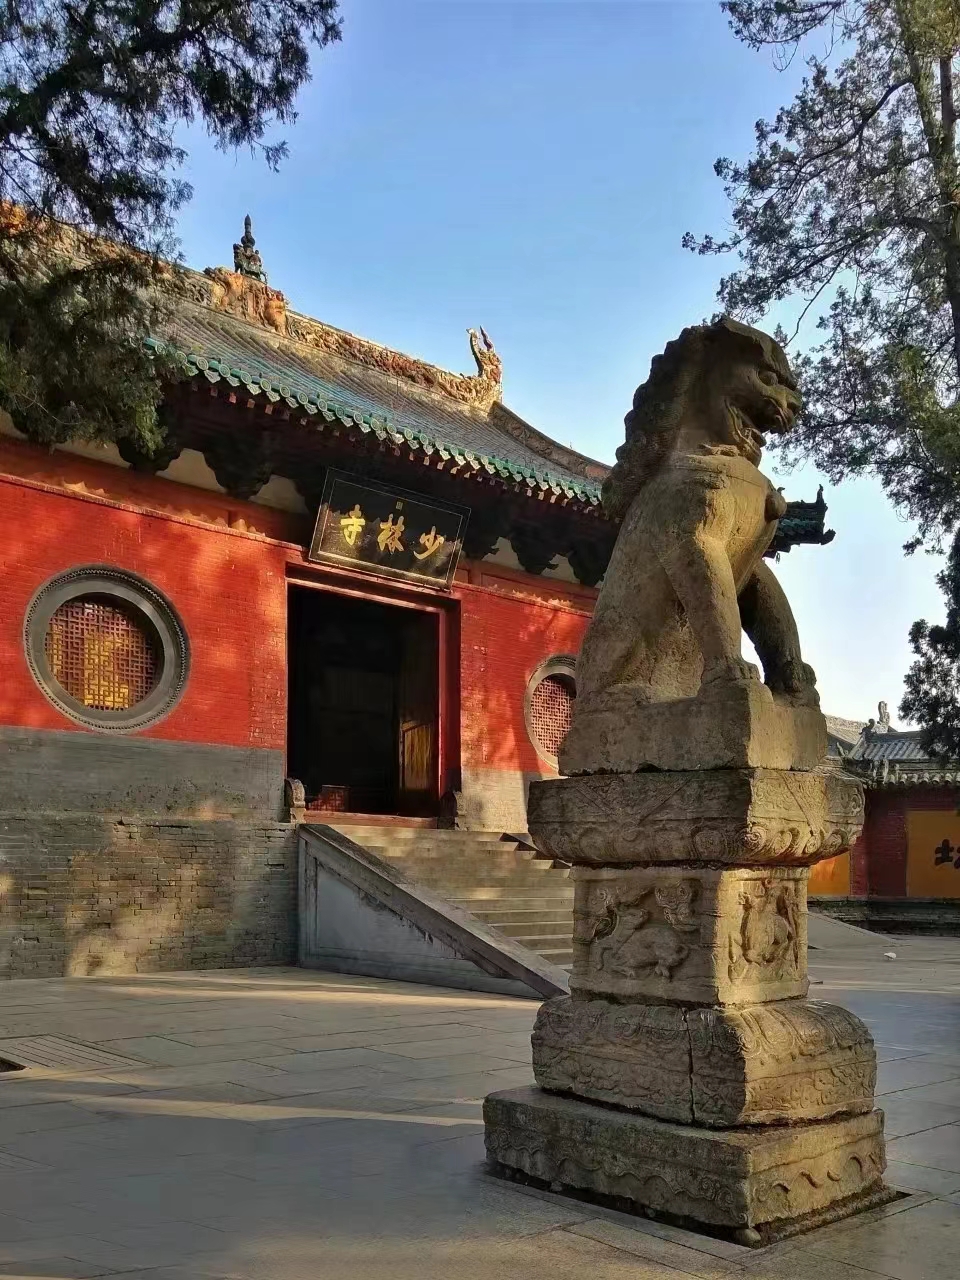 The Shaolin Temple, birthplace of Shaolin Kung-fu